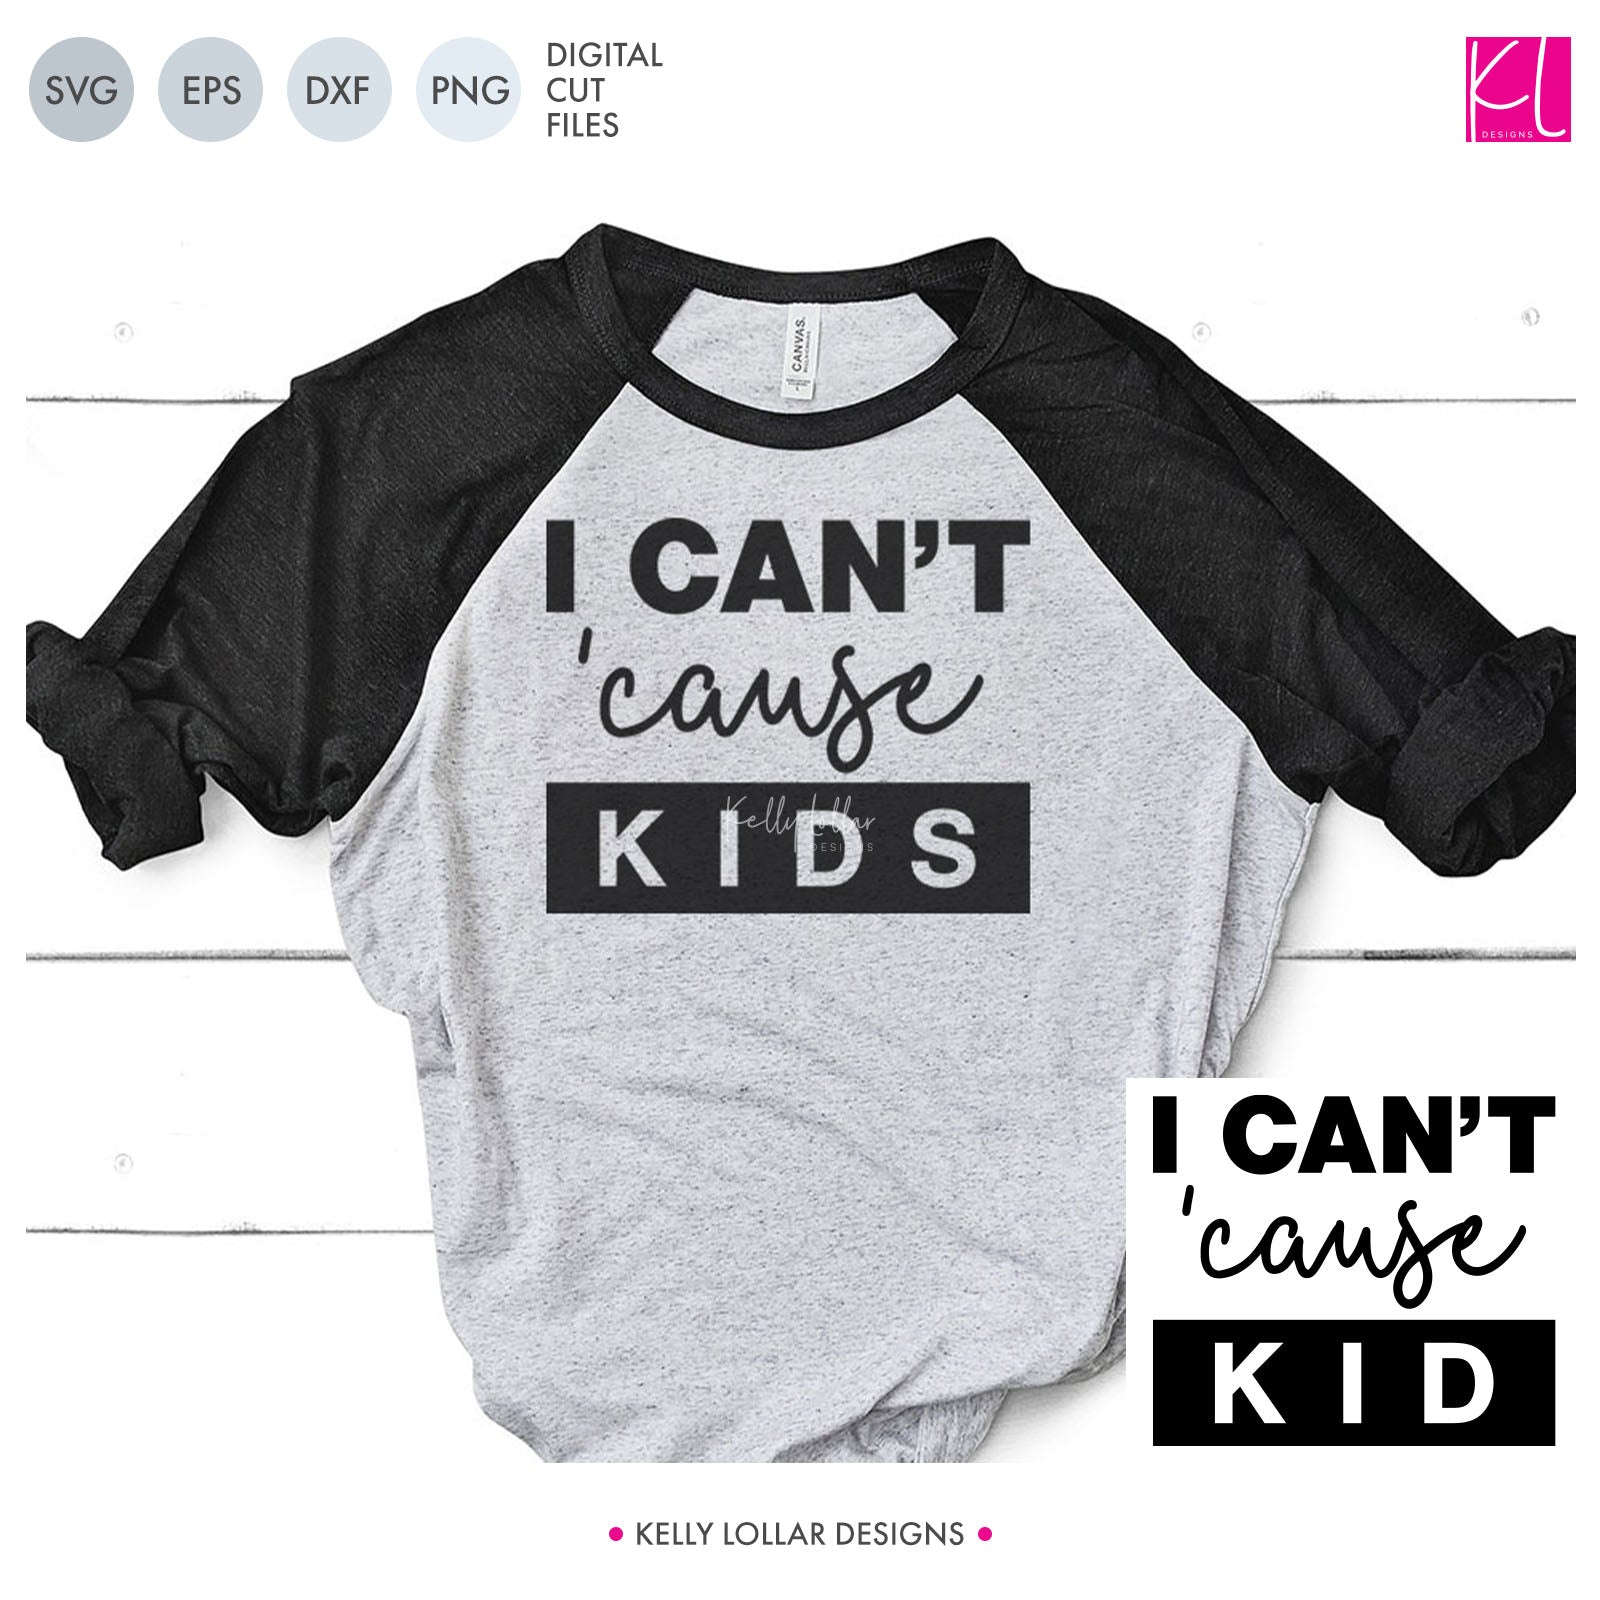 I Can't 'Cause Kids Funny Quote | SVG DXF EPS PNG Cut Files | Free for Commercial Use